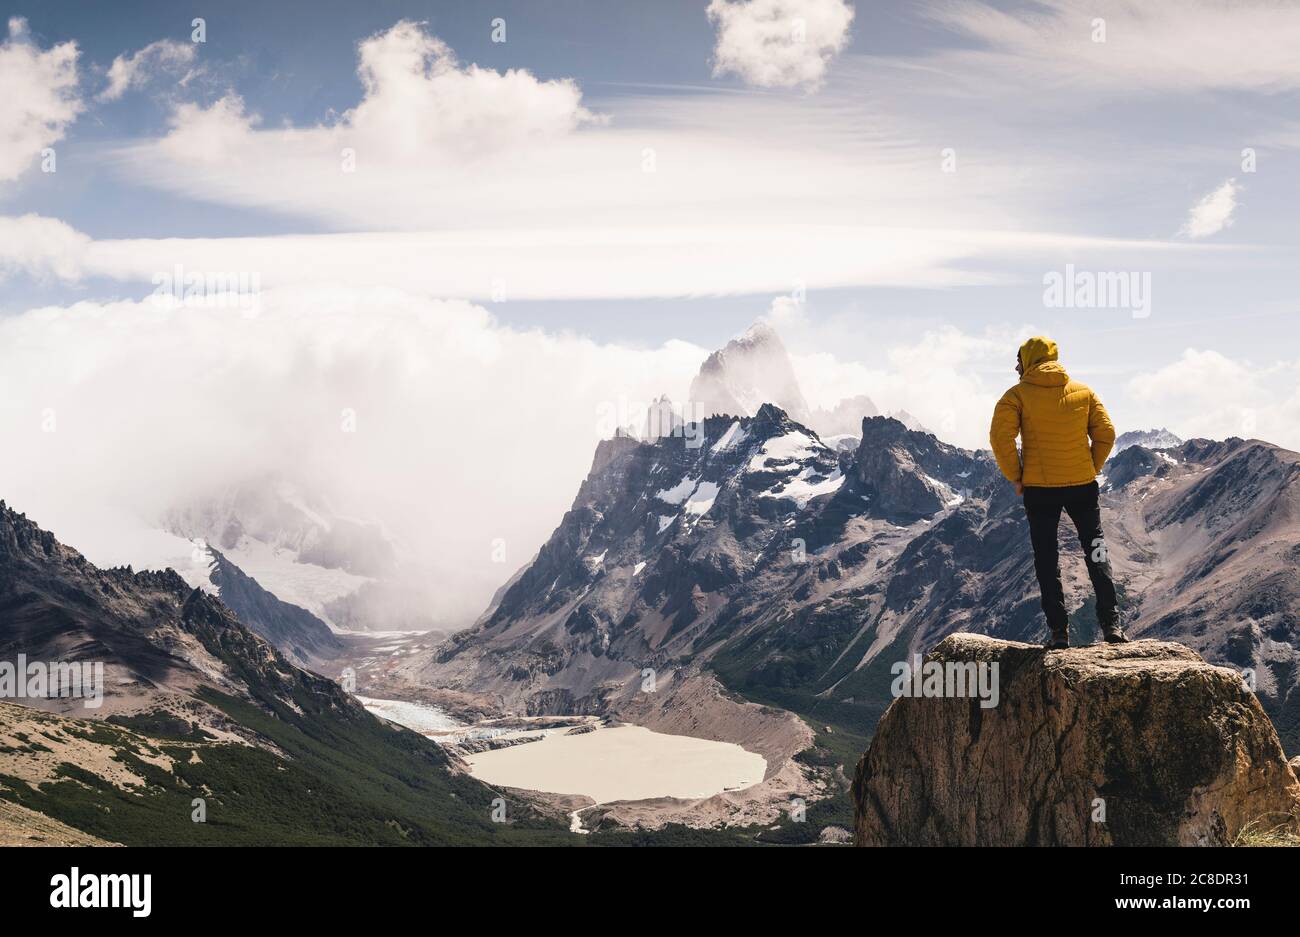 Man looking at snowcapped mountain against cloudy sky, Patagonia, Argentina Stock Photo